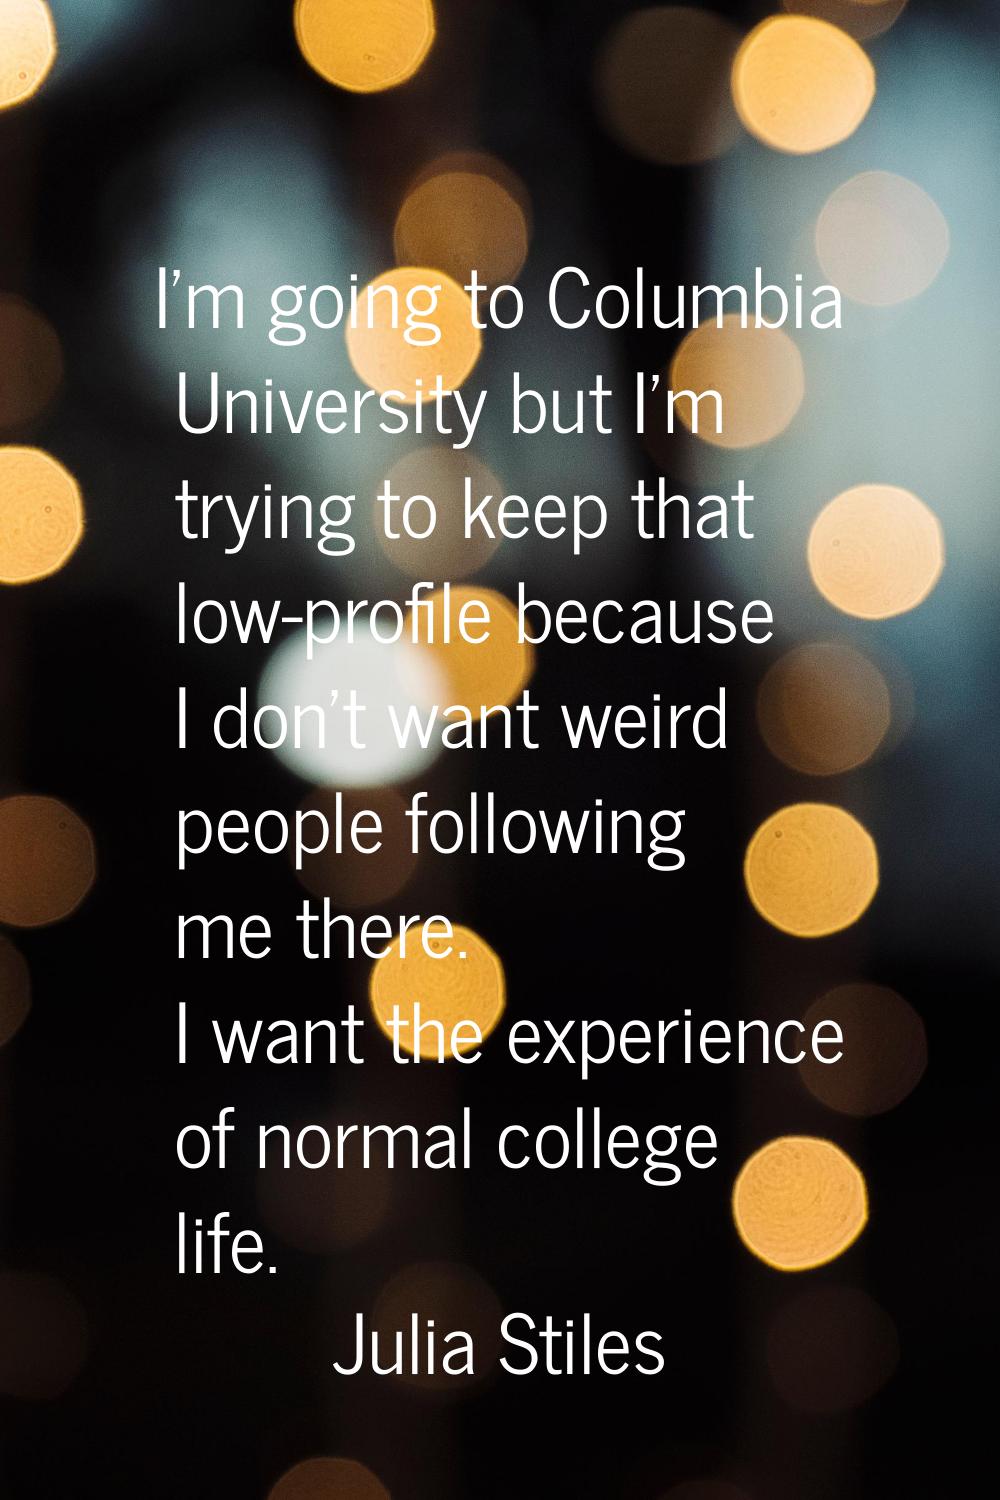 I'm going to Columbia University but I'm trying to keep that low-profile because I don't want weird